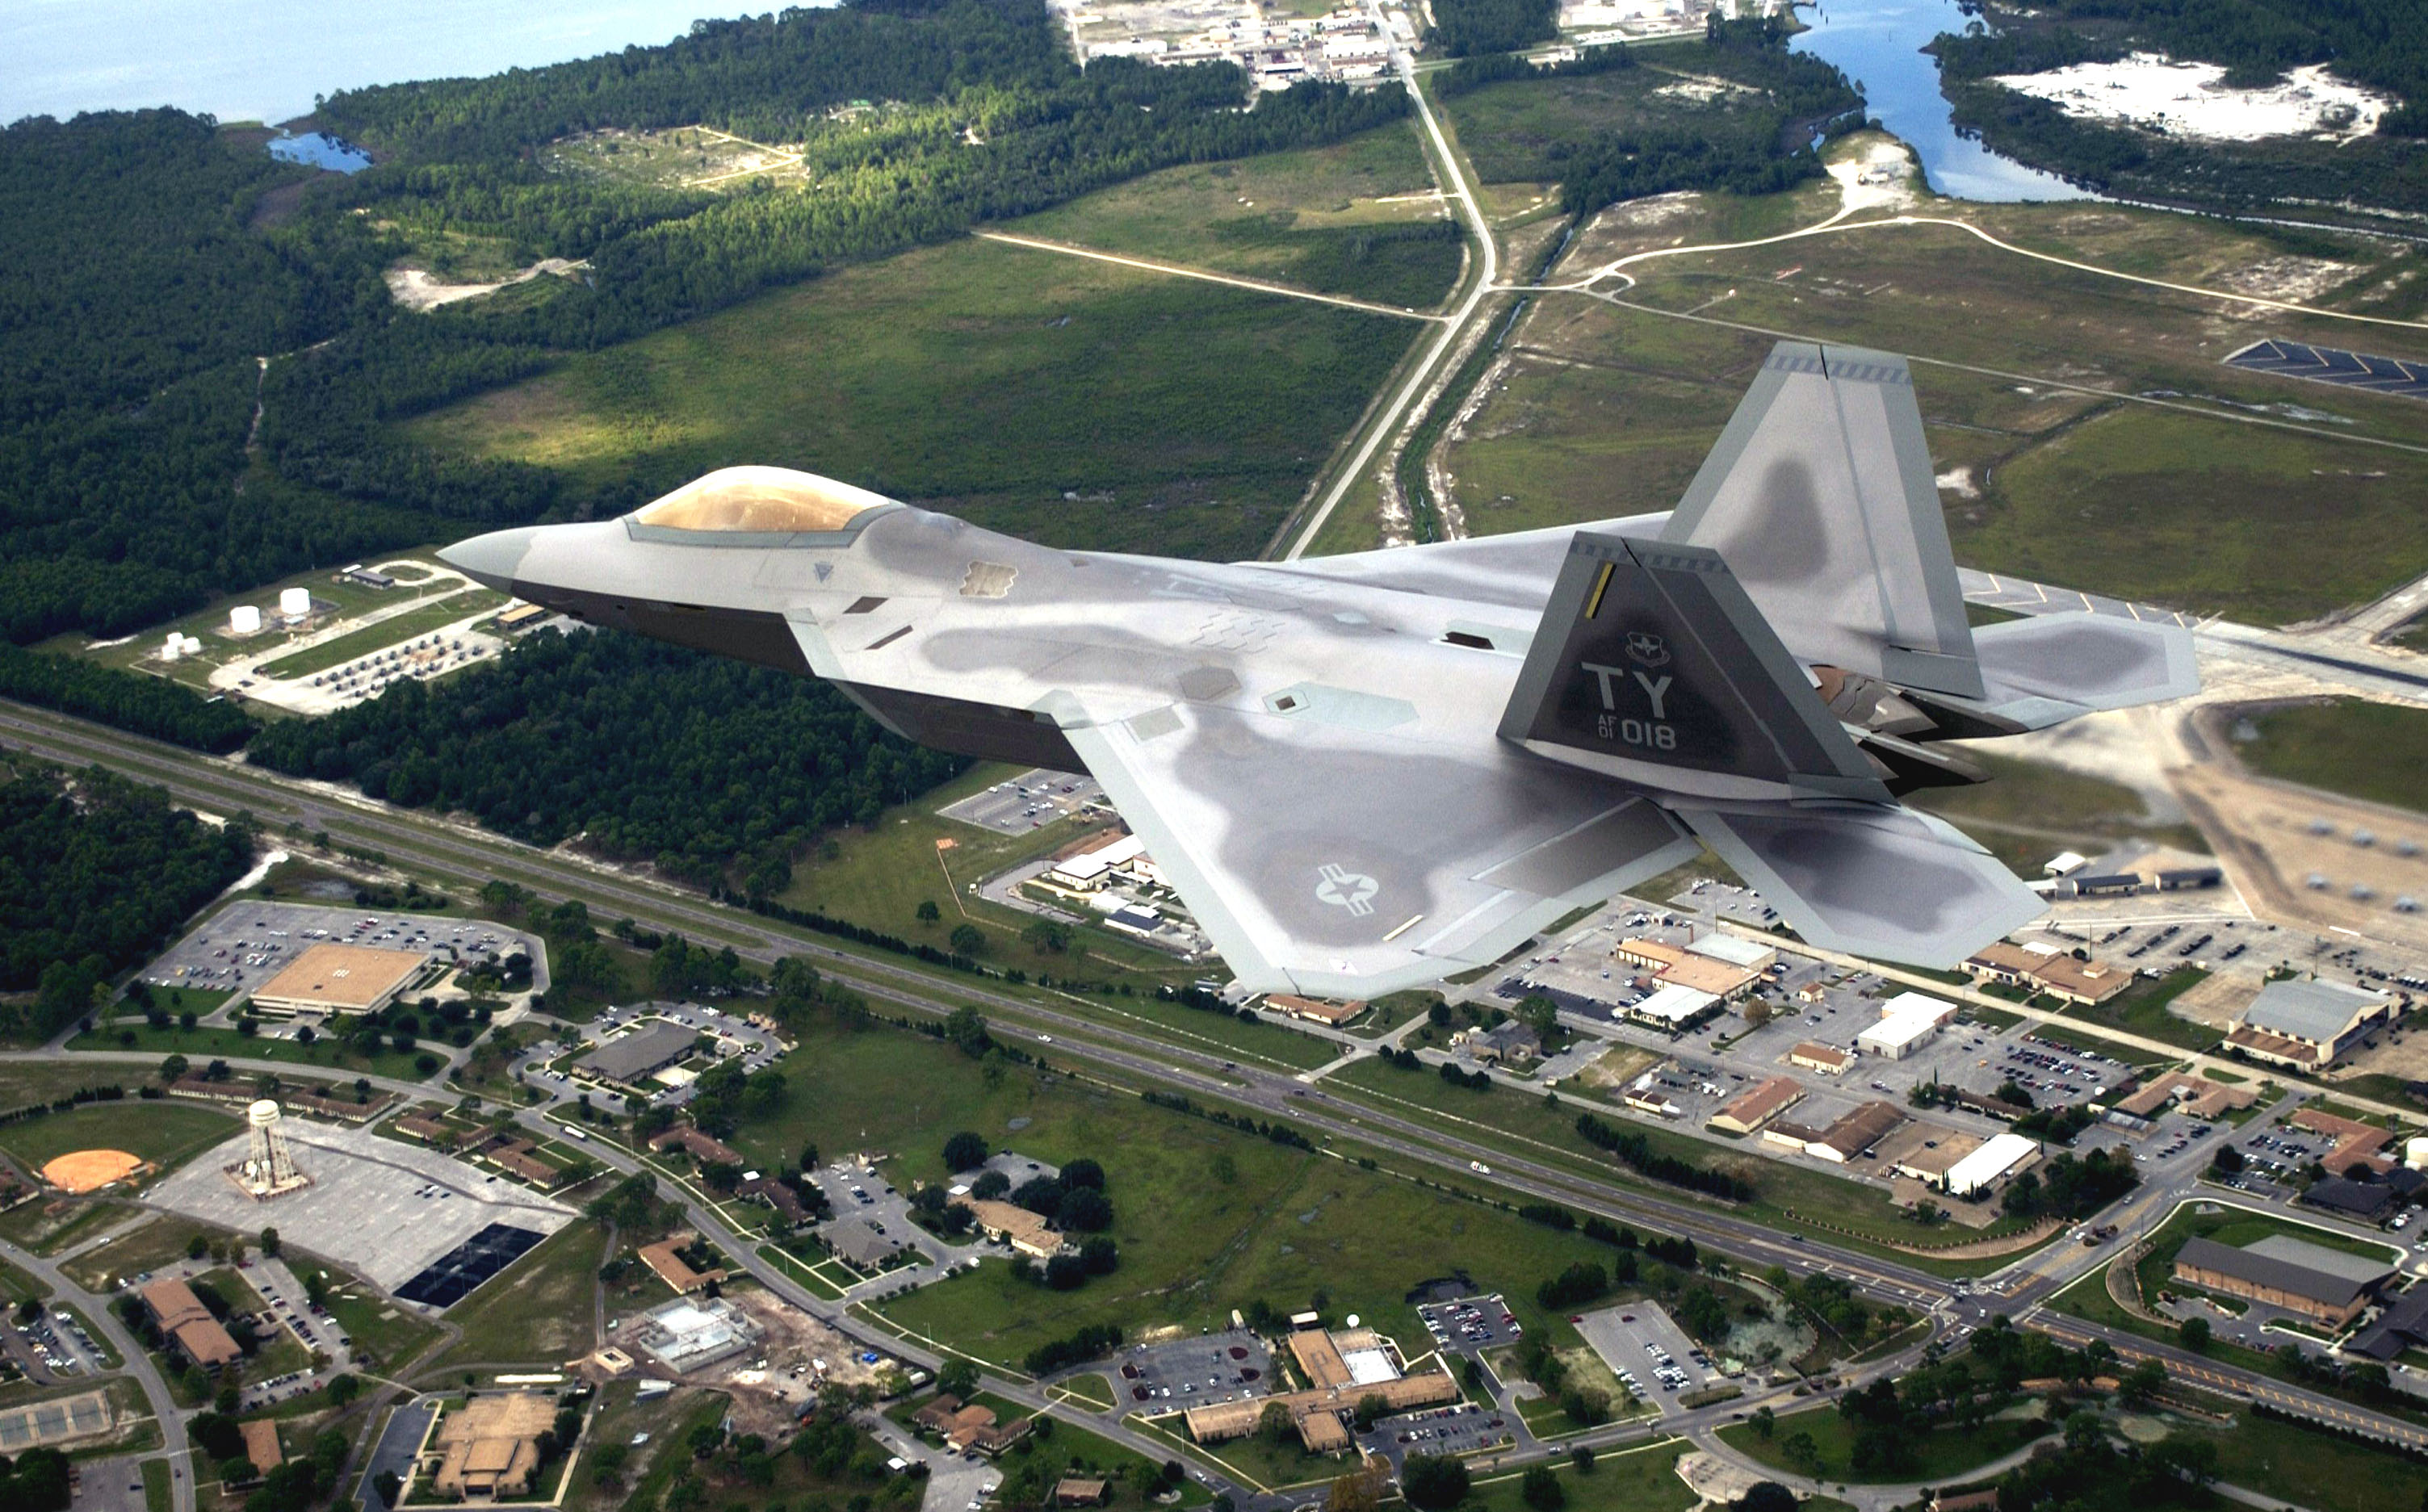 Tyndall Air Force Base has sent an F-22 Raptor fighter jet to the museum and is preparing for the arrival of the F-35 Lightning II